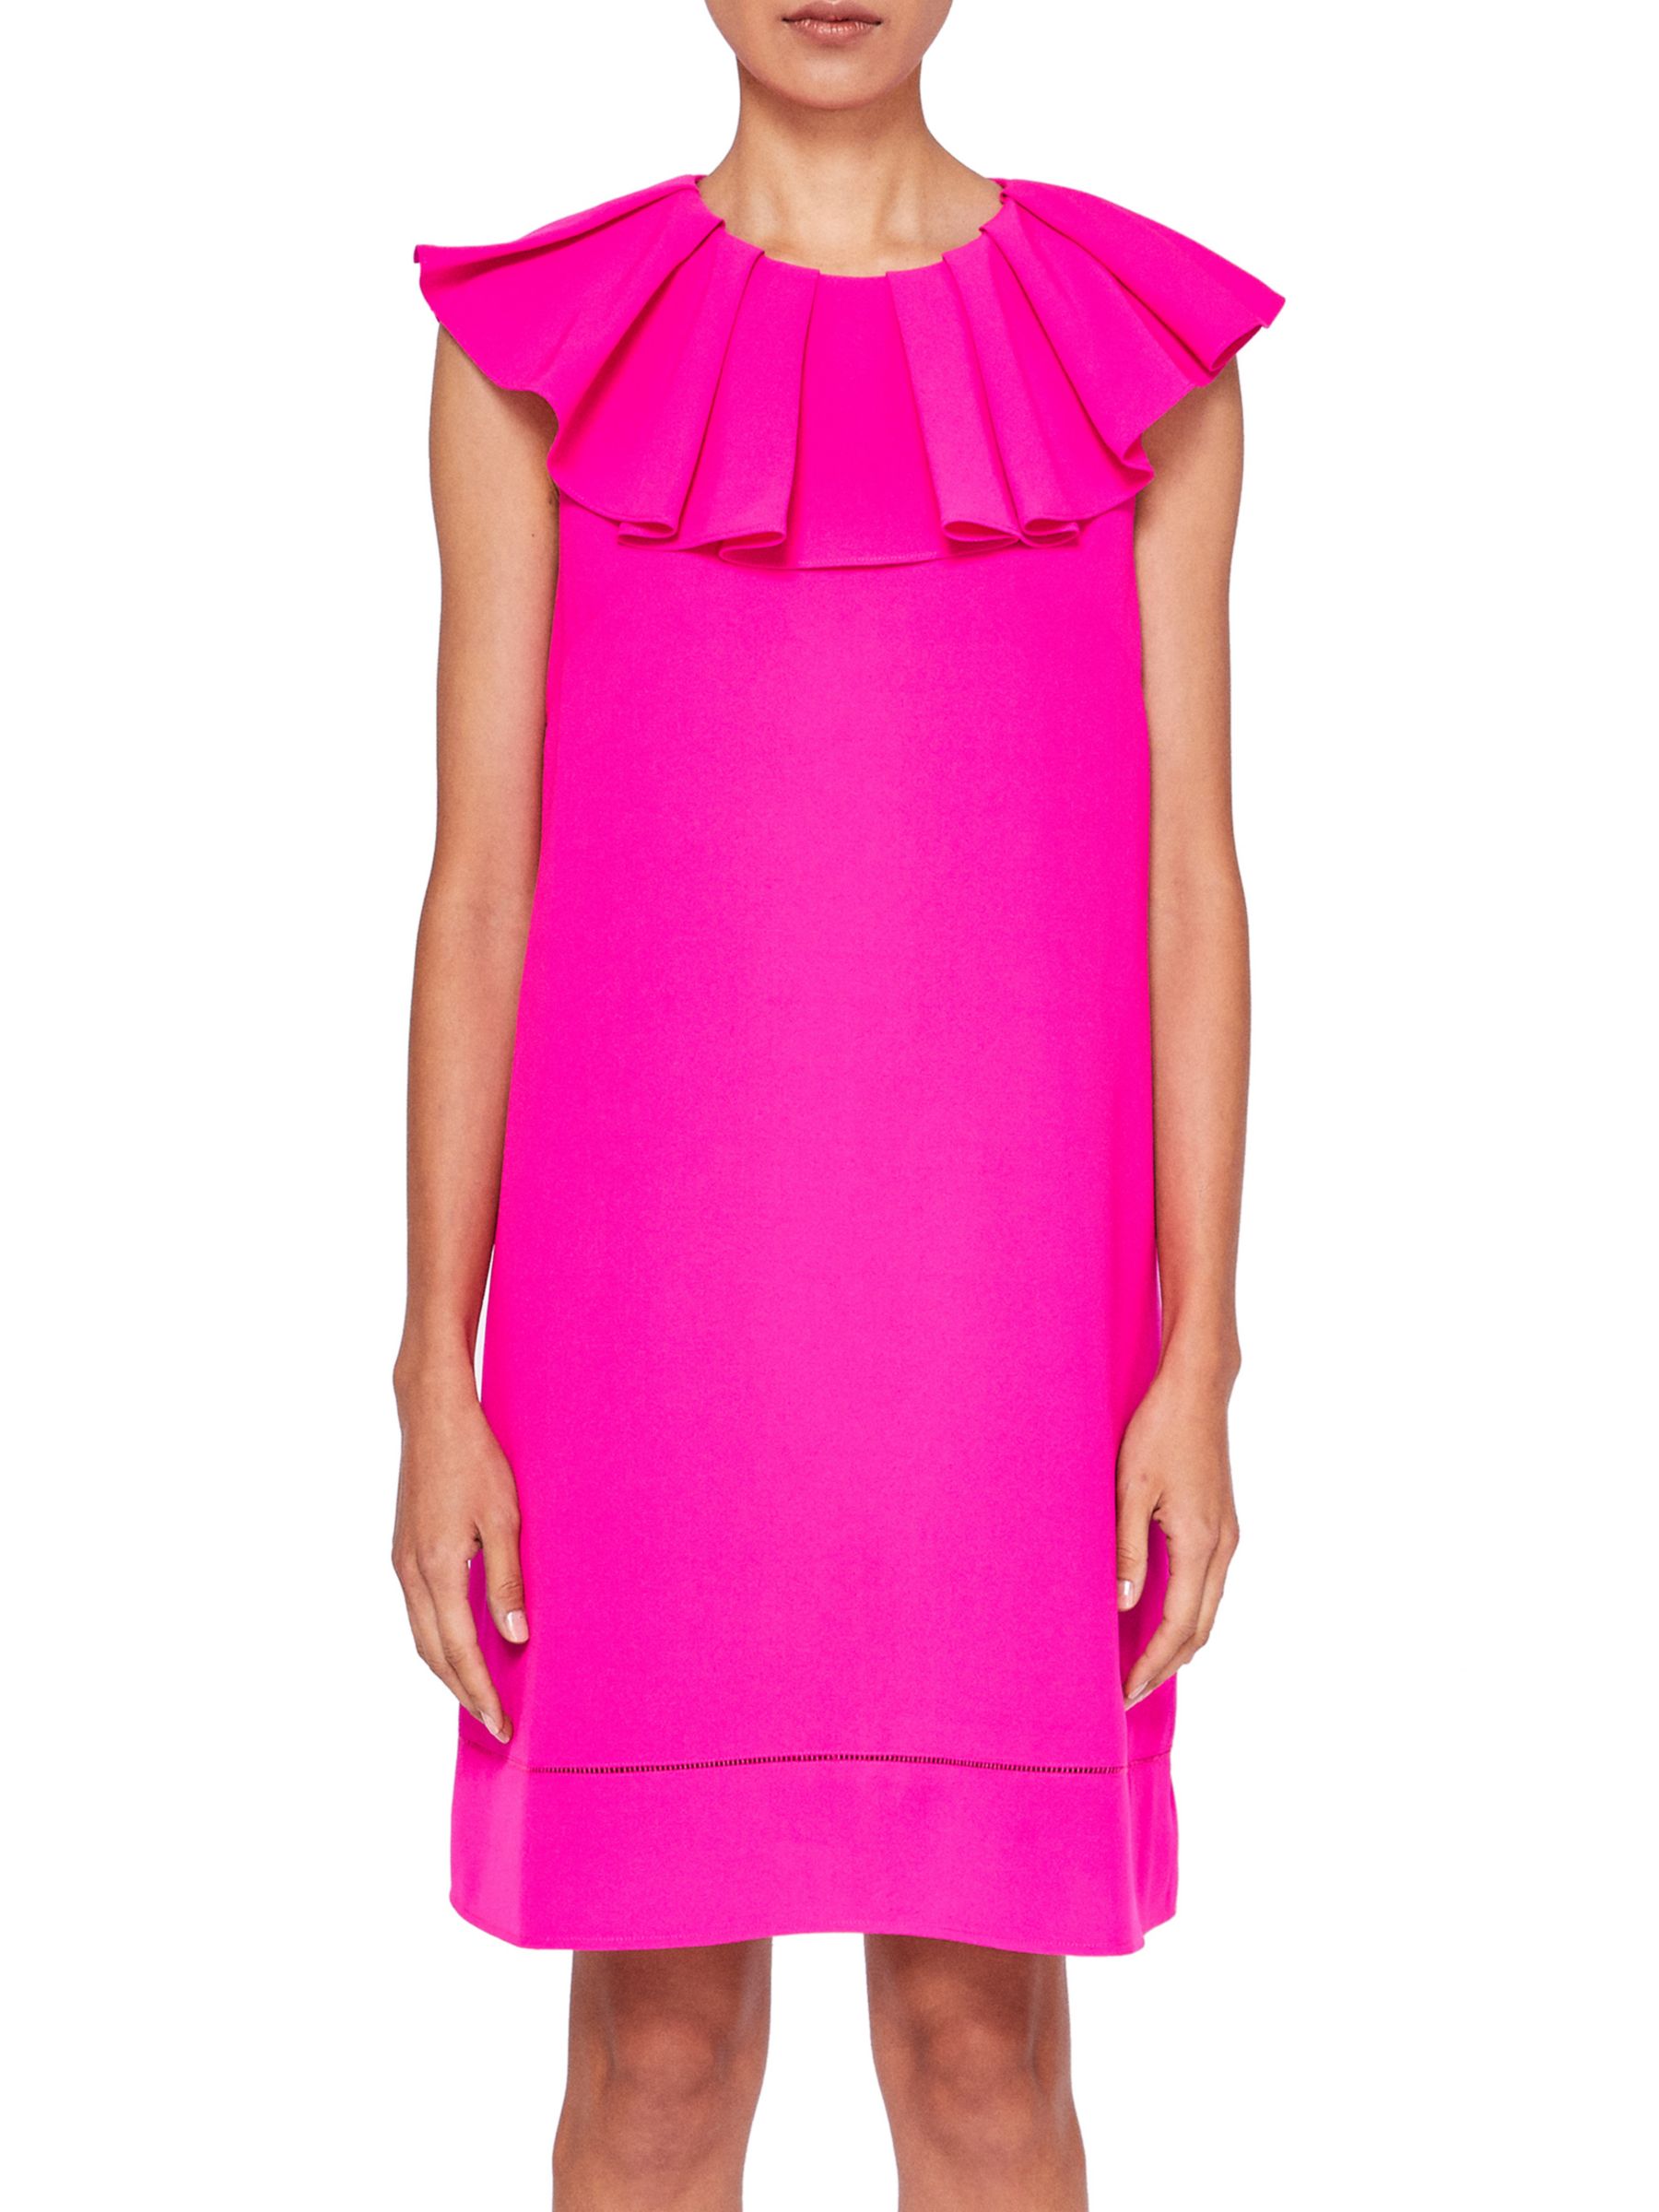 ted baker bright pink dress